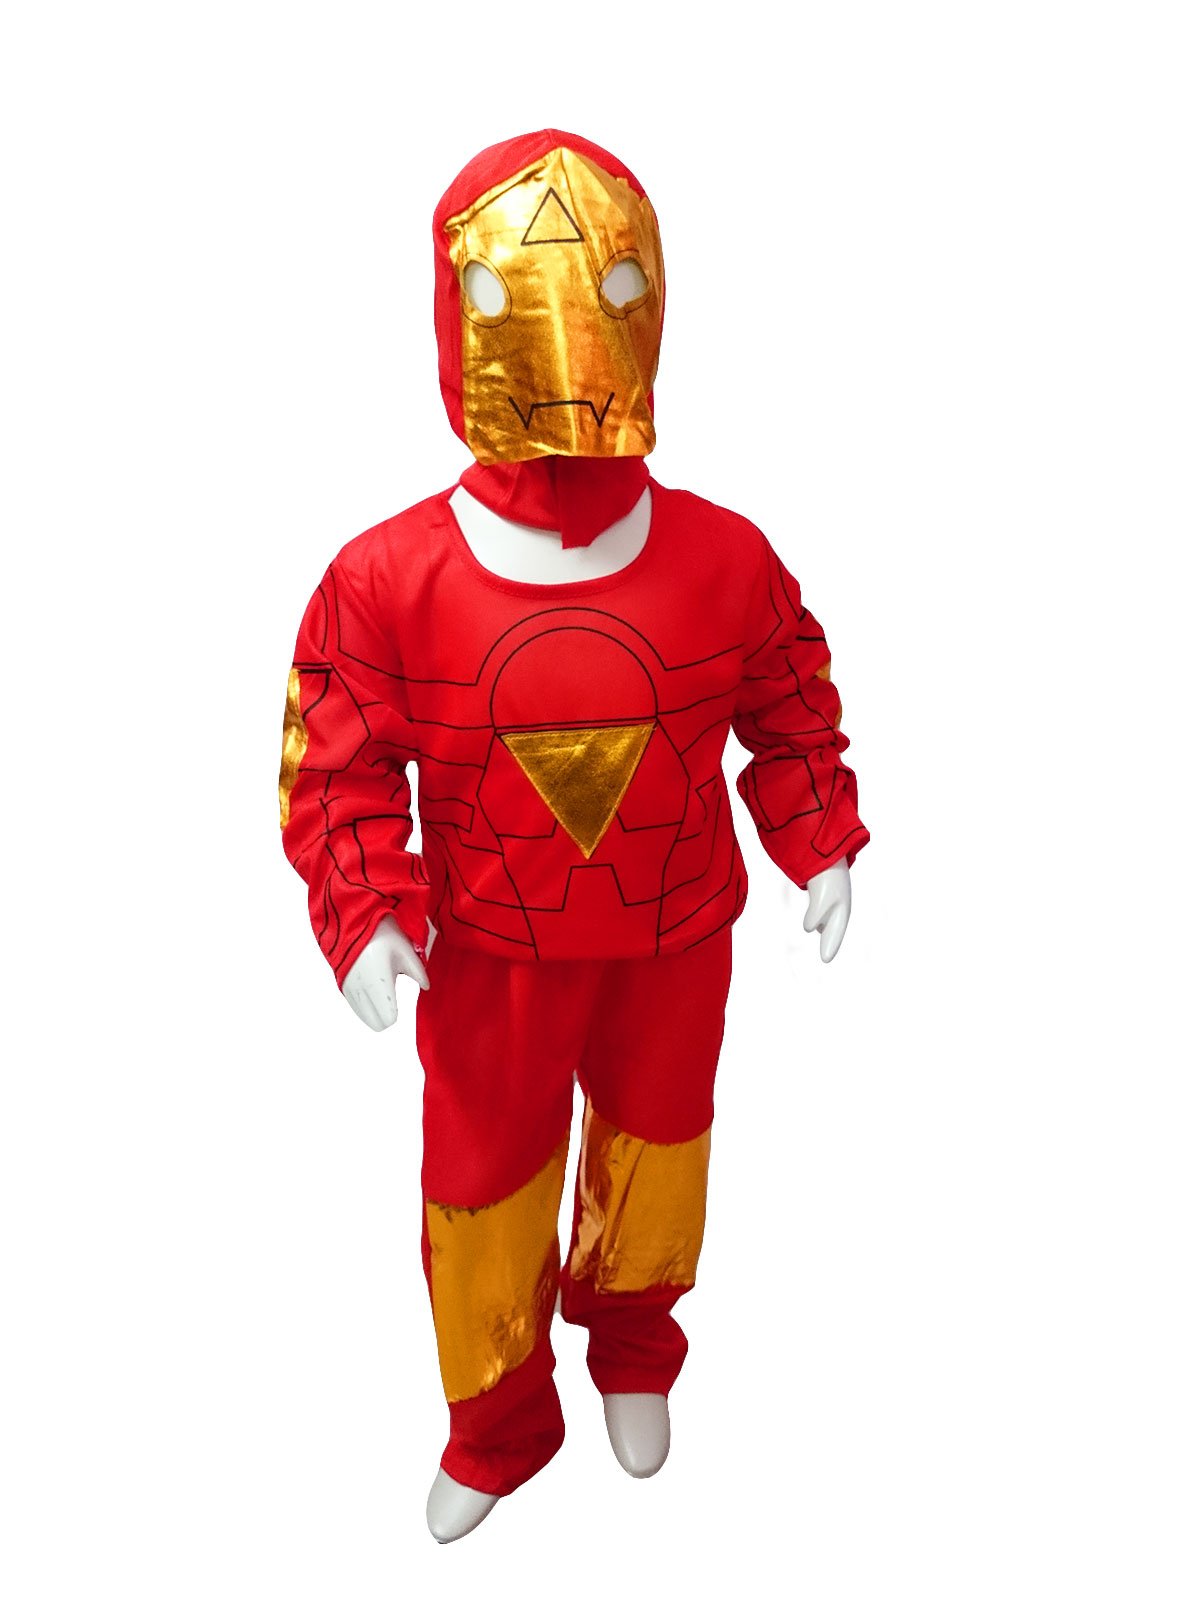 Superhero Avenger Iron Man Costumes Fully Comfortable for Kids dress  Costumes with Mask Kids Costume Wear (